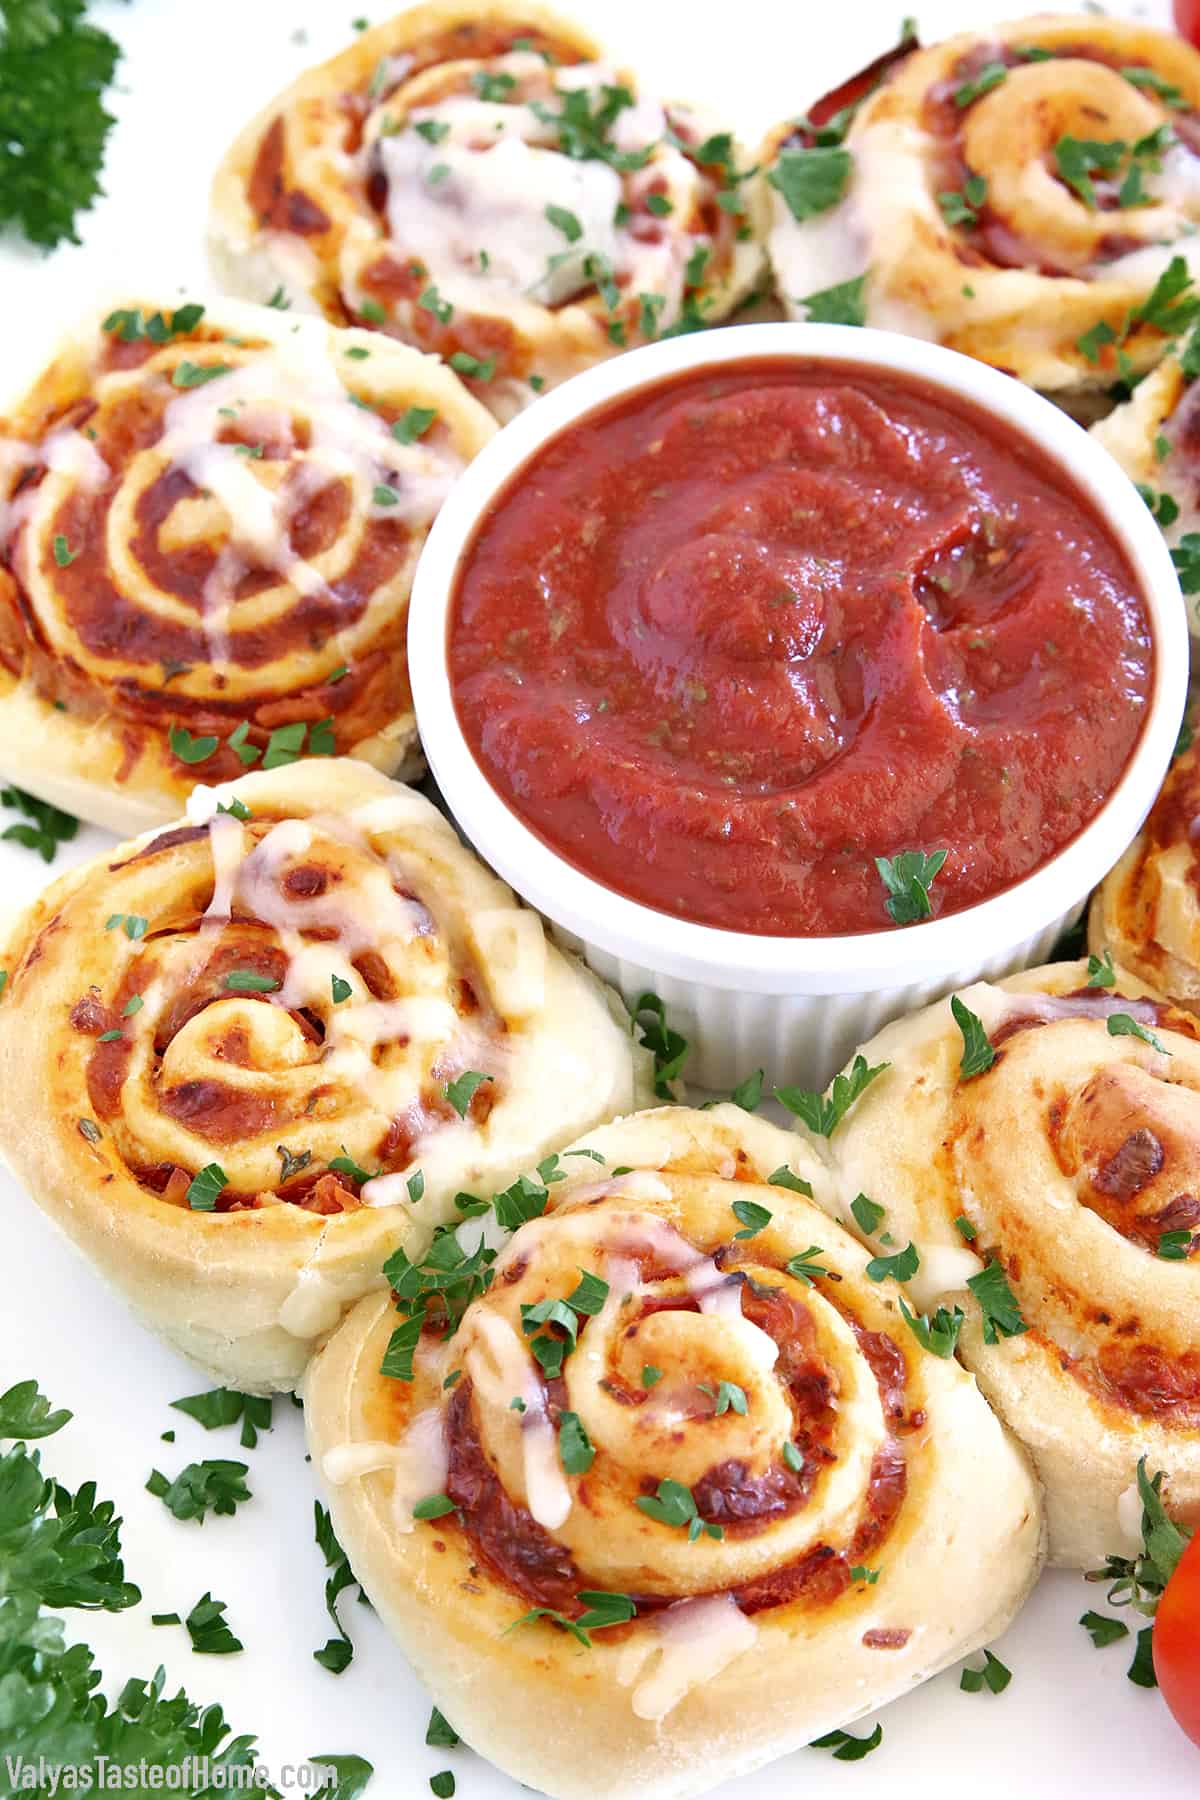 Move over, tiny pizza bites, because here come hearty Easy Pepperoni Pizza Rolls! This recipe is made with my popular super soft and chewy Homemade Pizza Dough, Homemade Pizza Sauce, loads of scrumptious turkey pepperoni, and mozzarella cheese. All rolled up into one amazingly tasty treat that is always a big hit at my house.